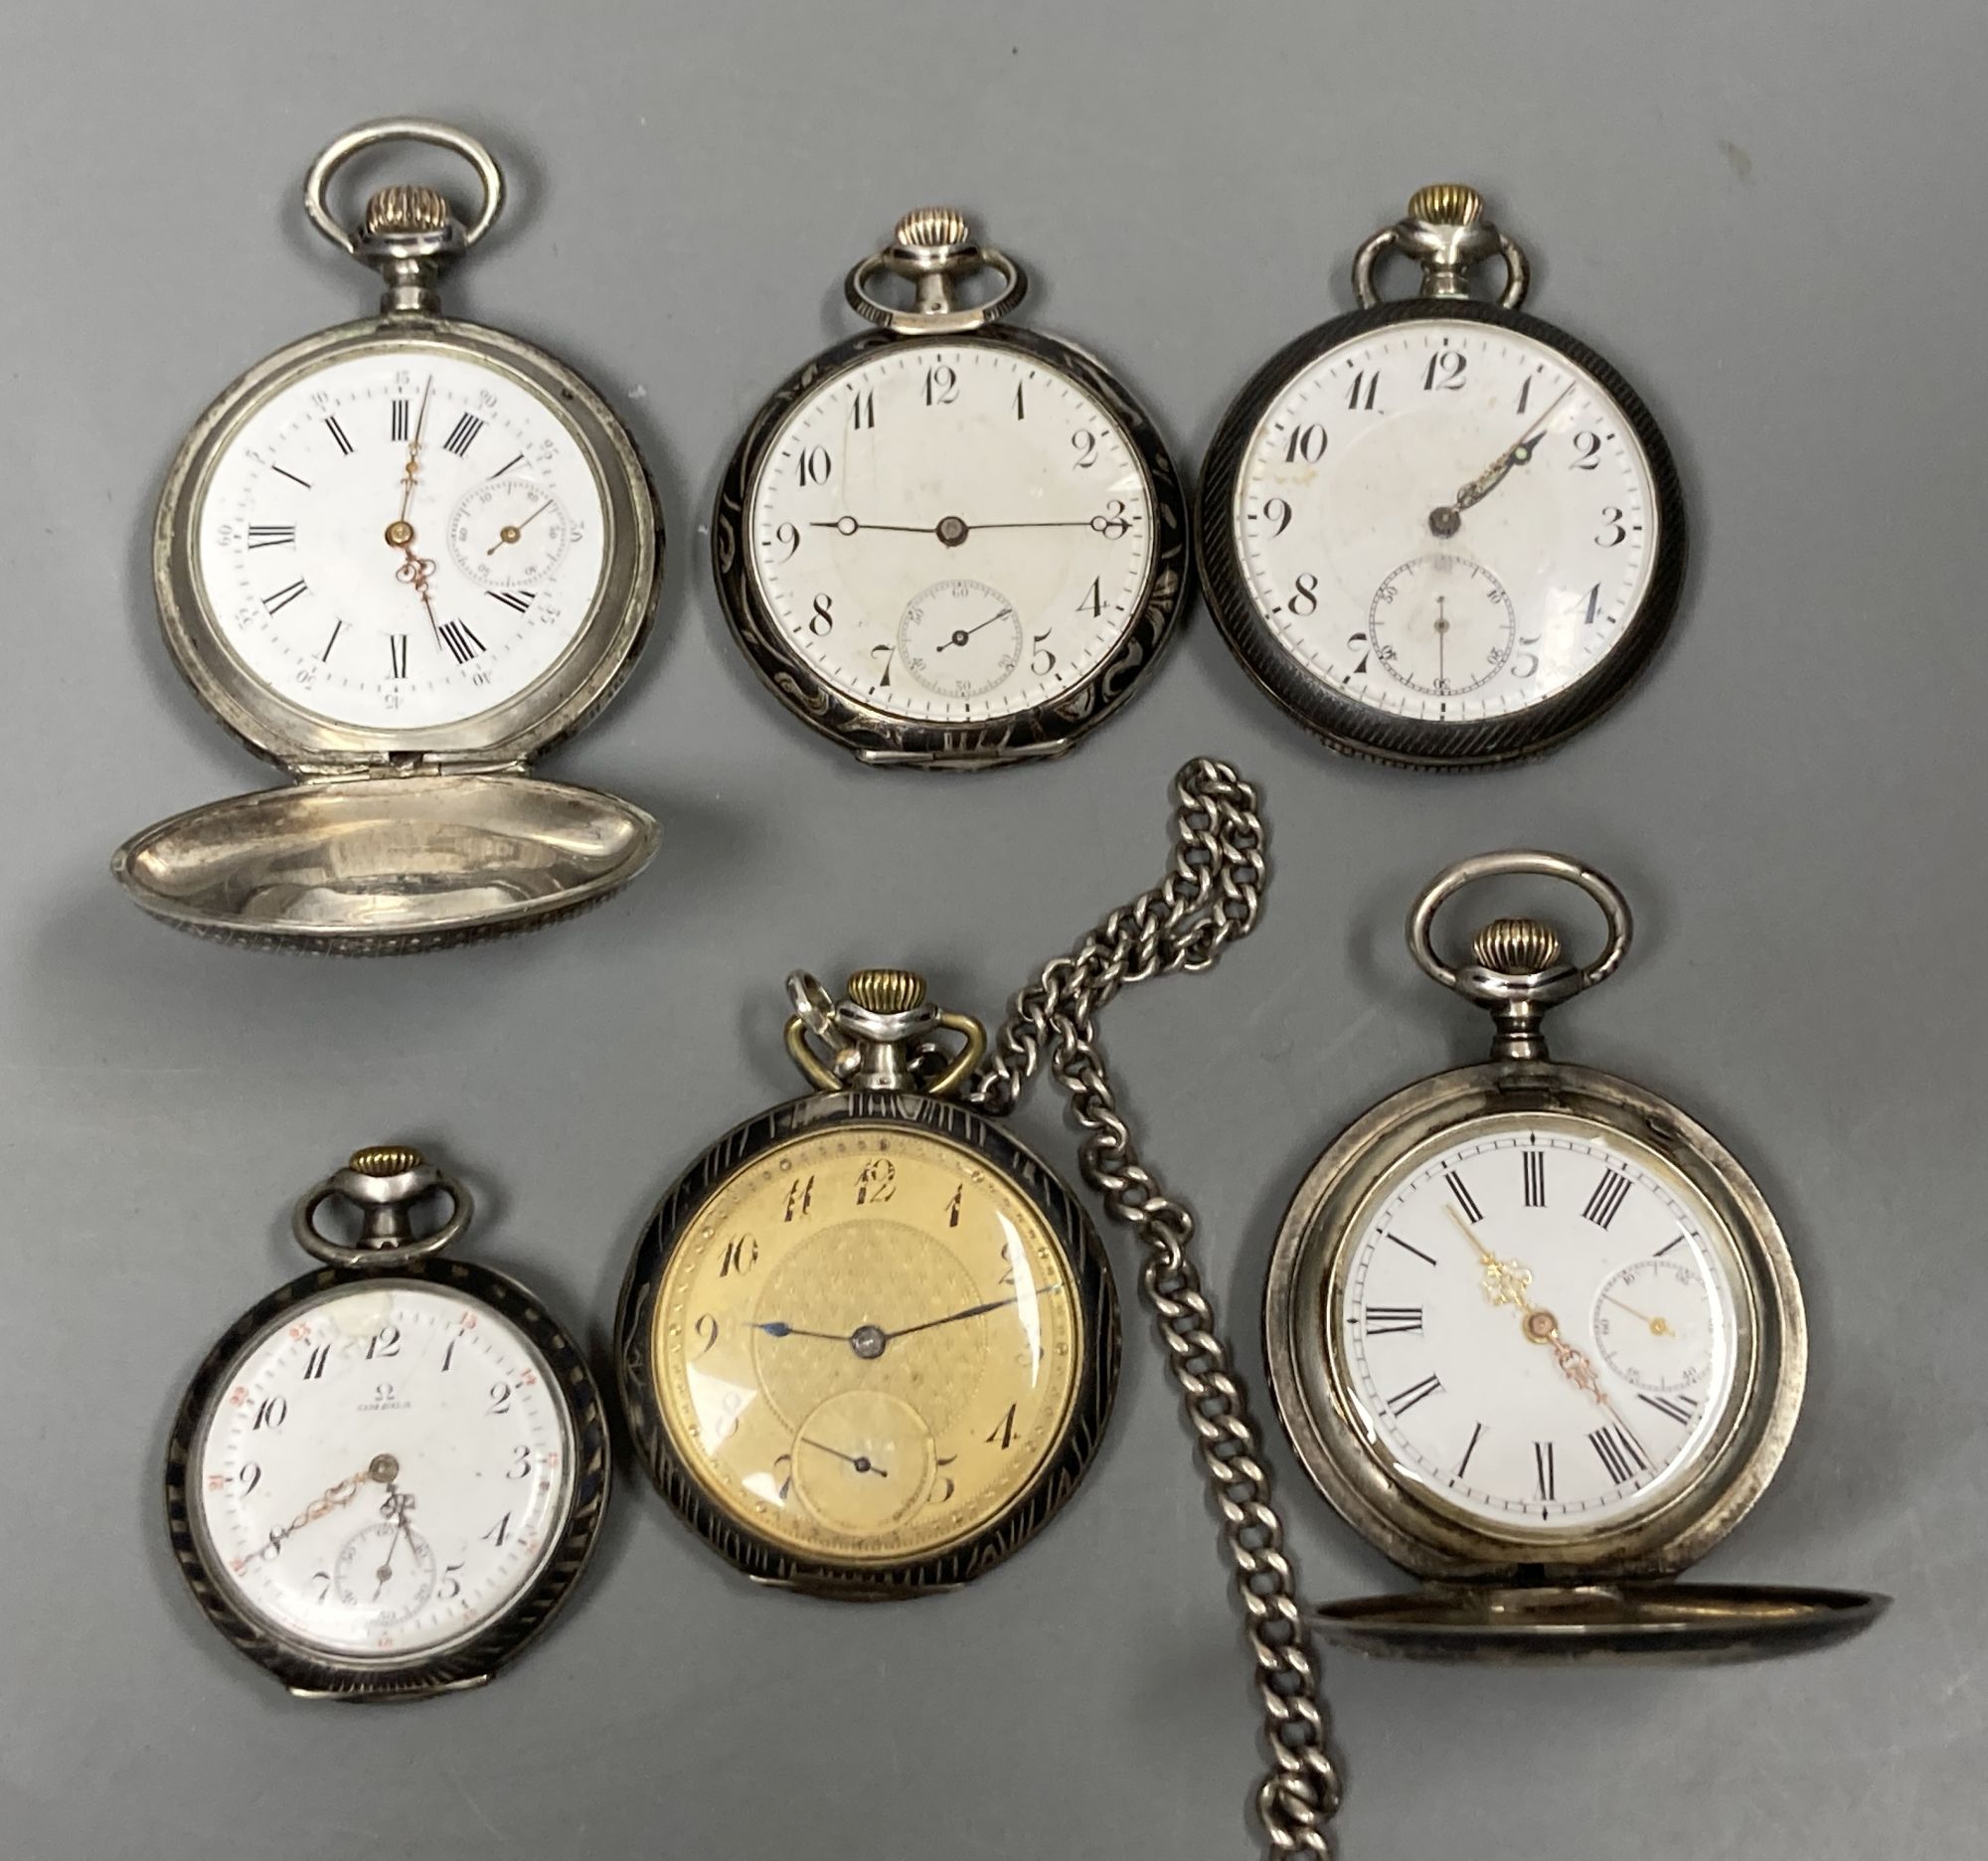 A German 800 standard and niello open face pocket watch and five other niello decorated pocket watches.